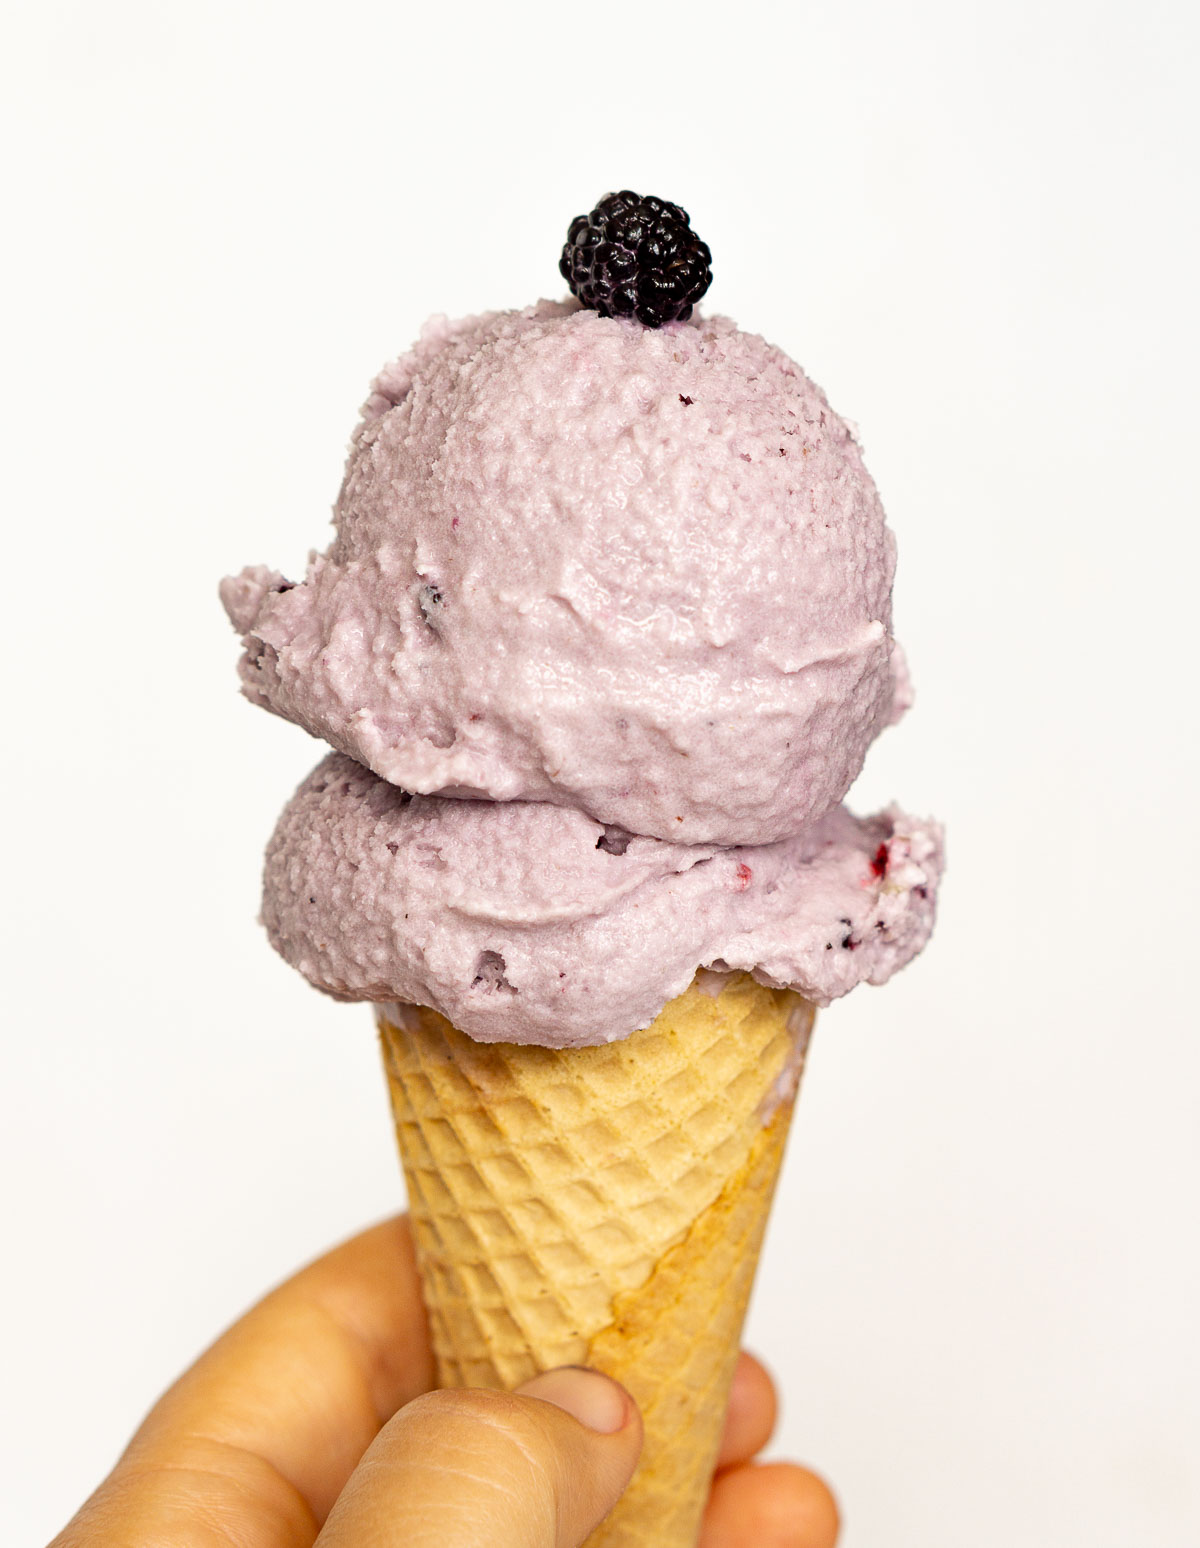 An ice cream cone with 2 scoops of mulberry ice cream